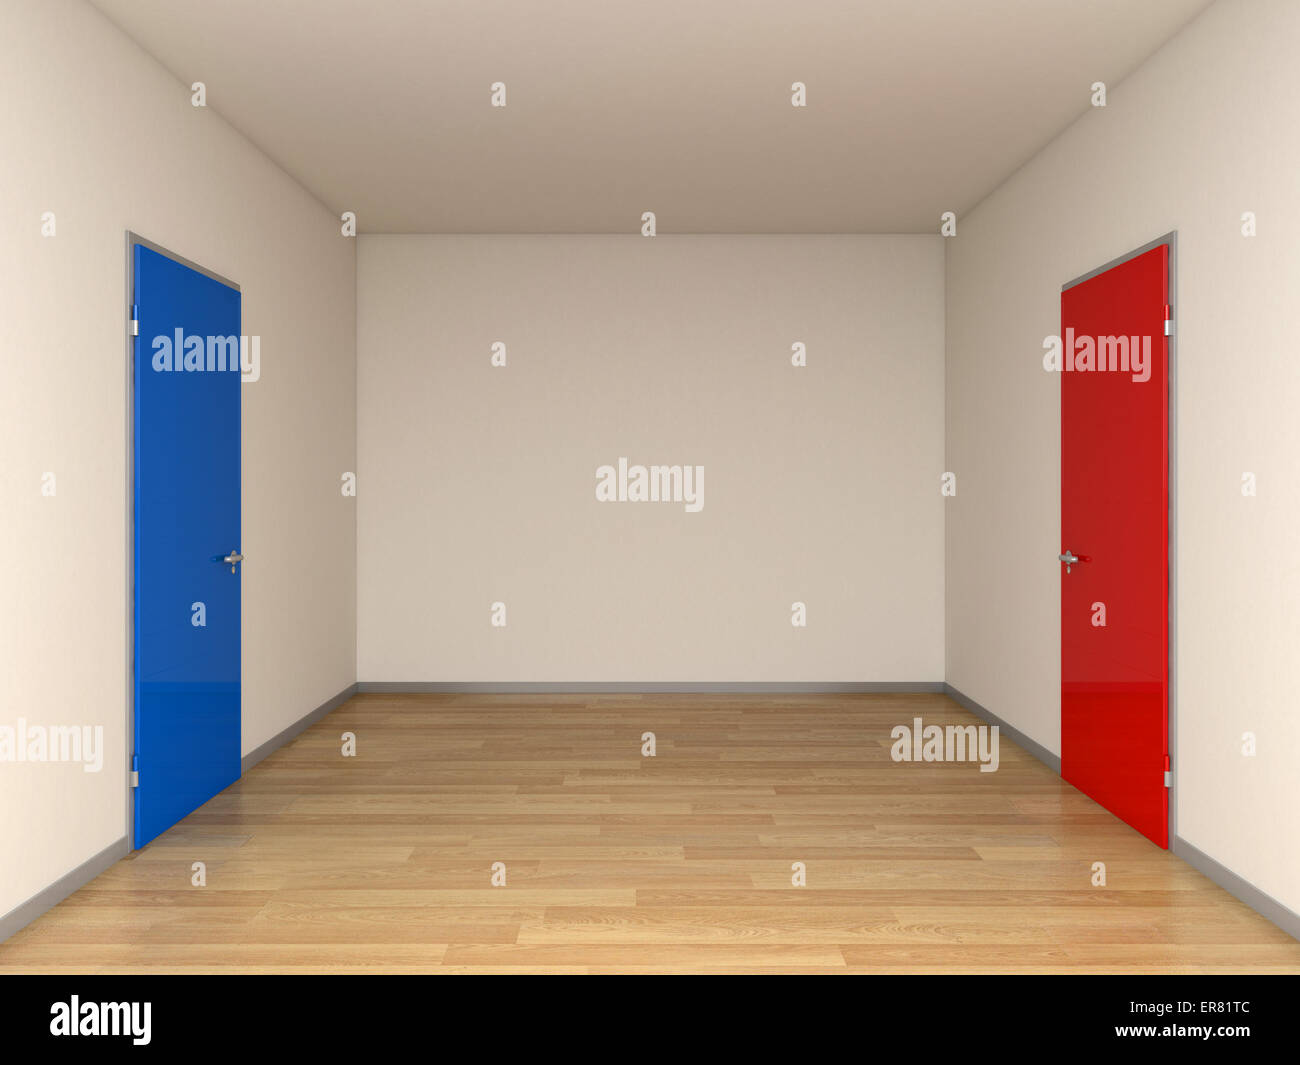 blue and red doors 3d image Stock Photo